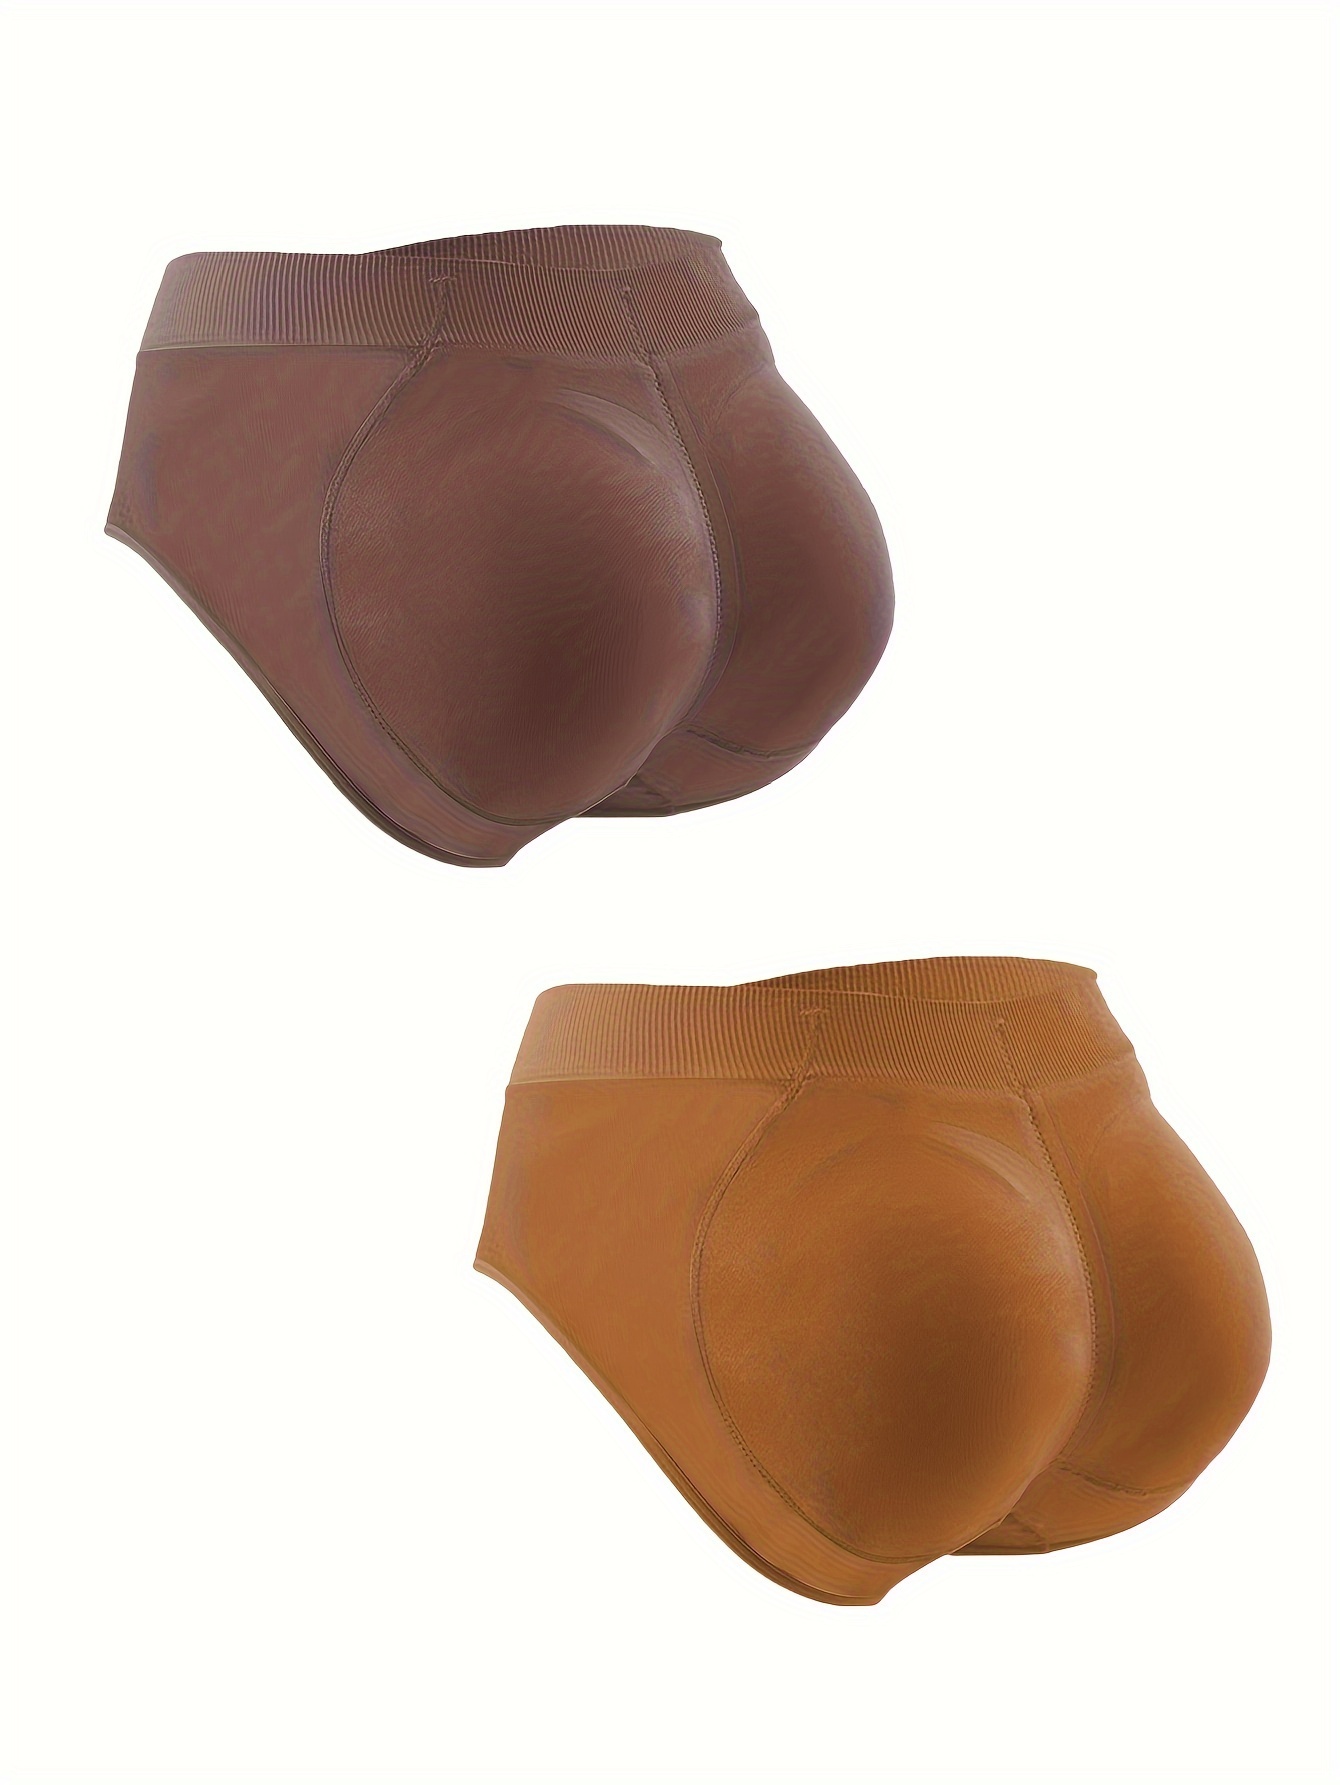 womens-booty-enhancer-hipster-panty-with-foam-butt-pads